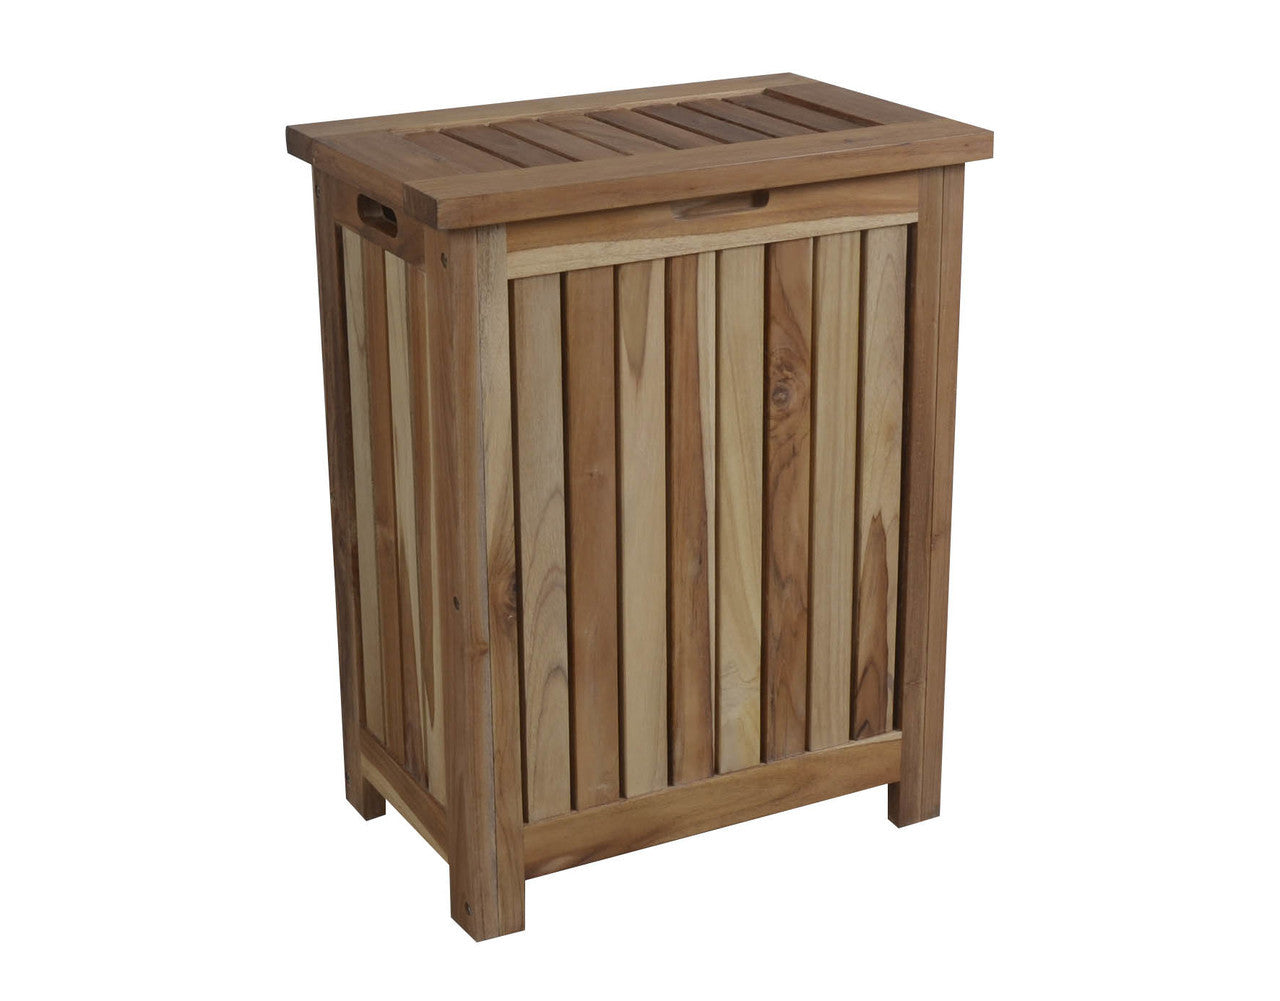 EcoDecors® Eleganto® 25" Teak Wood Double Laundry Storage Hamper with Removable Bags in EarthyTeak Finish